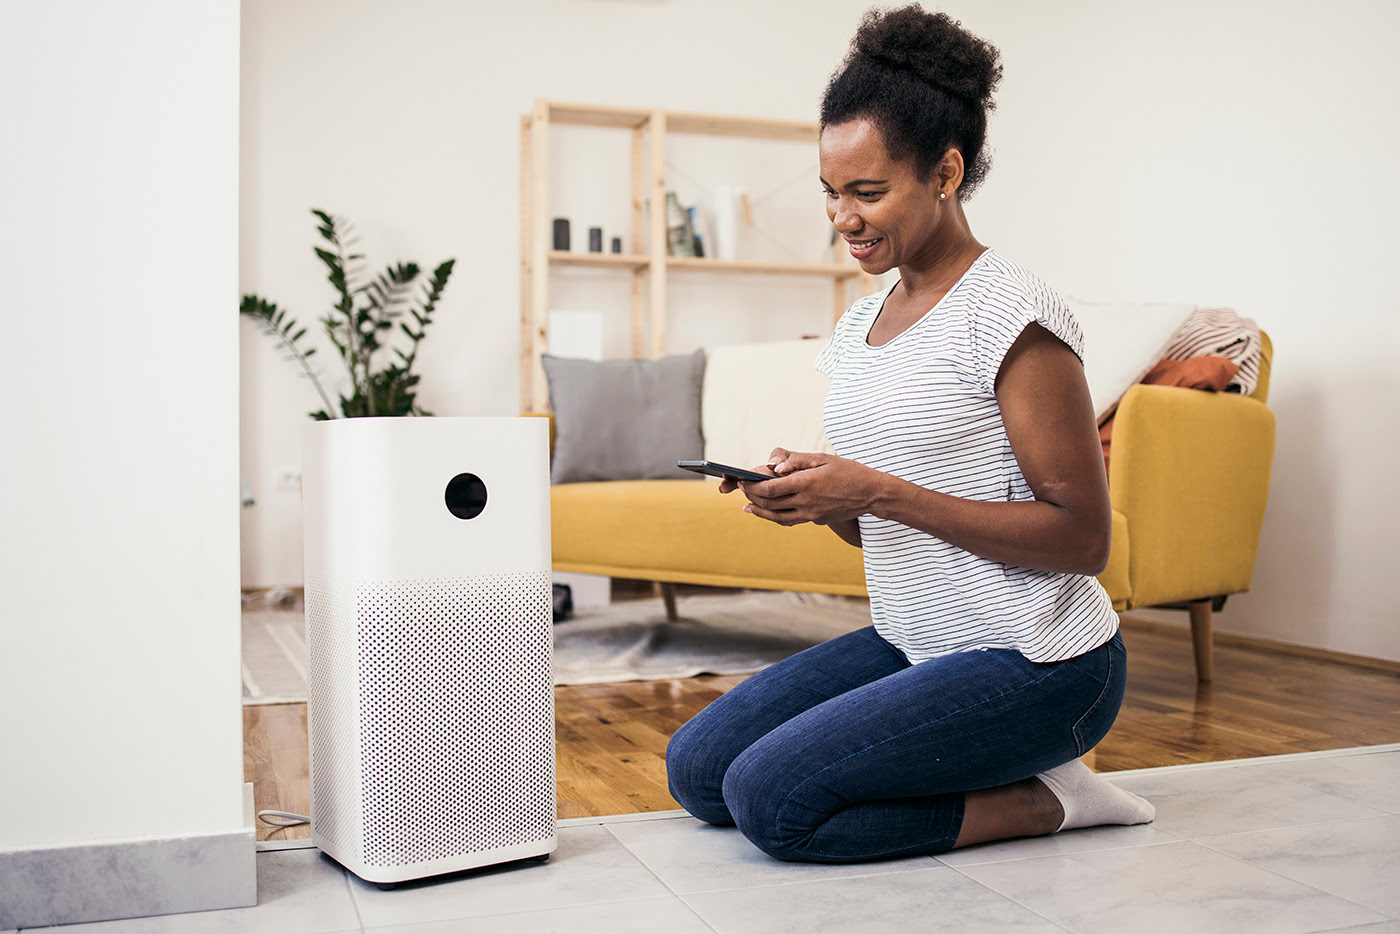 What Are The Best Types Of Space Heater For Warmth And Cost Efficiency?